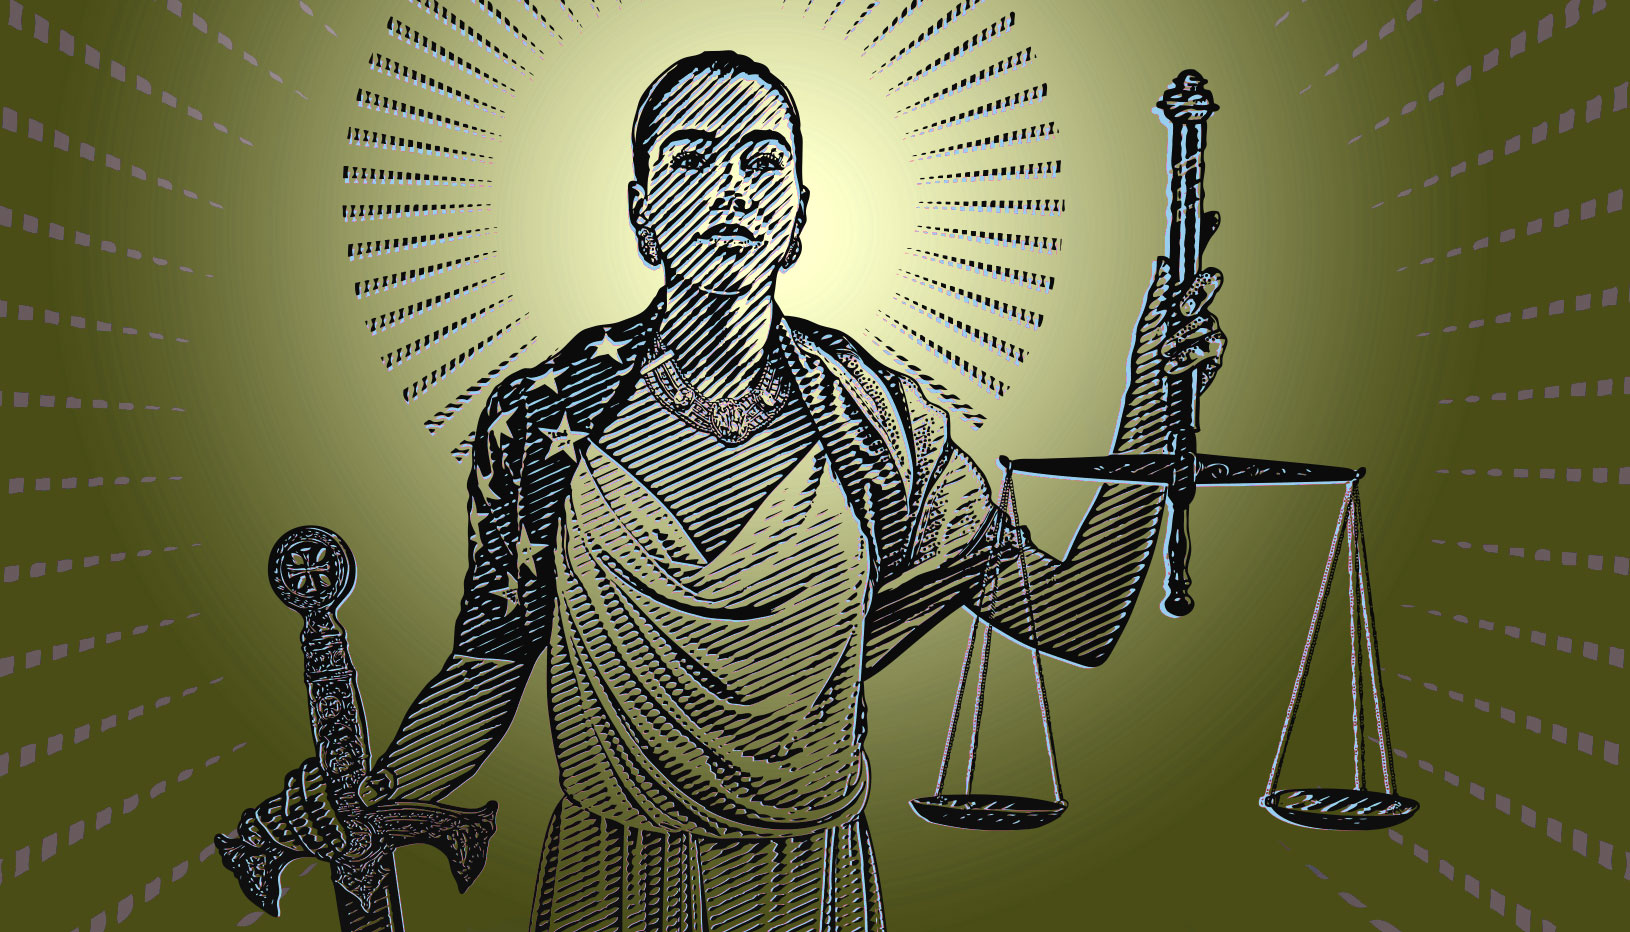 Representation of lady justice holding scales and a sword